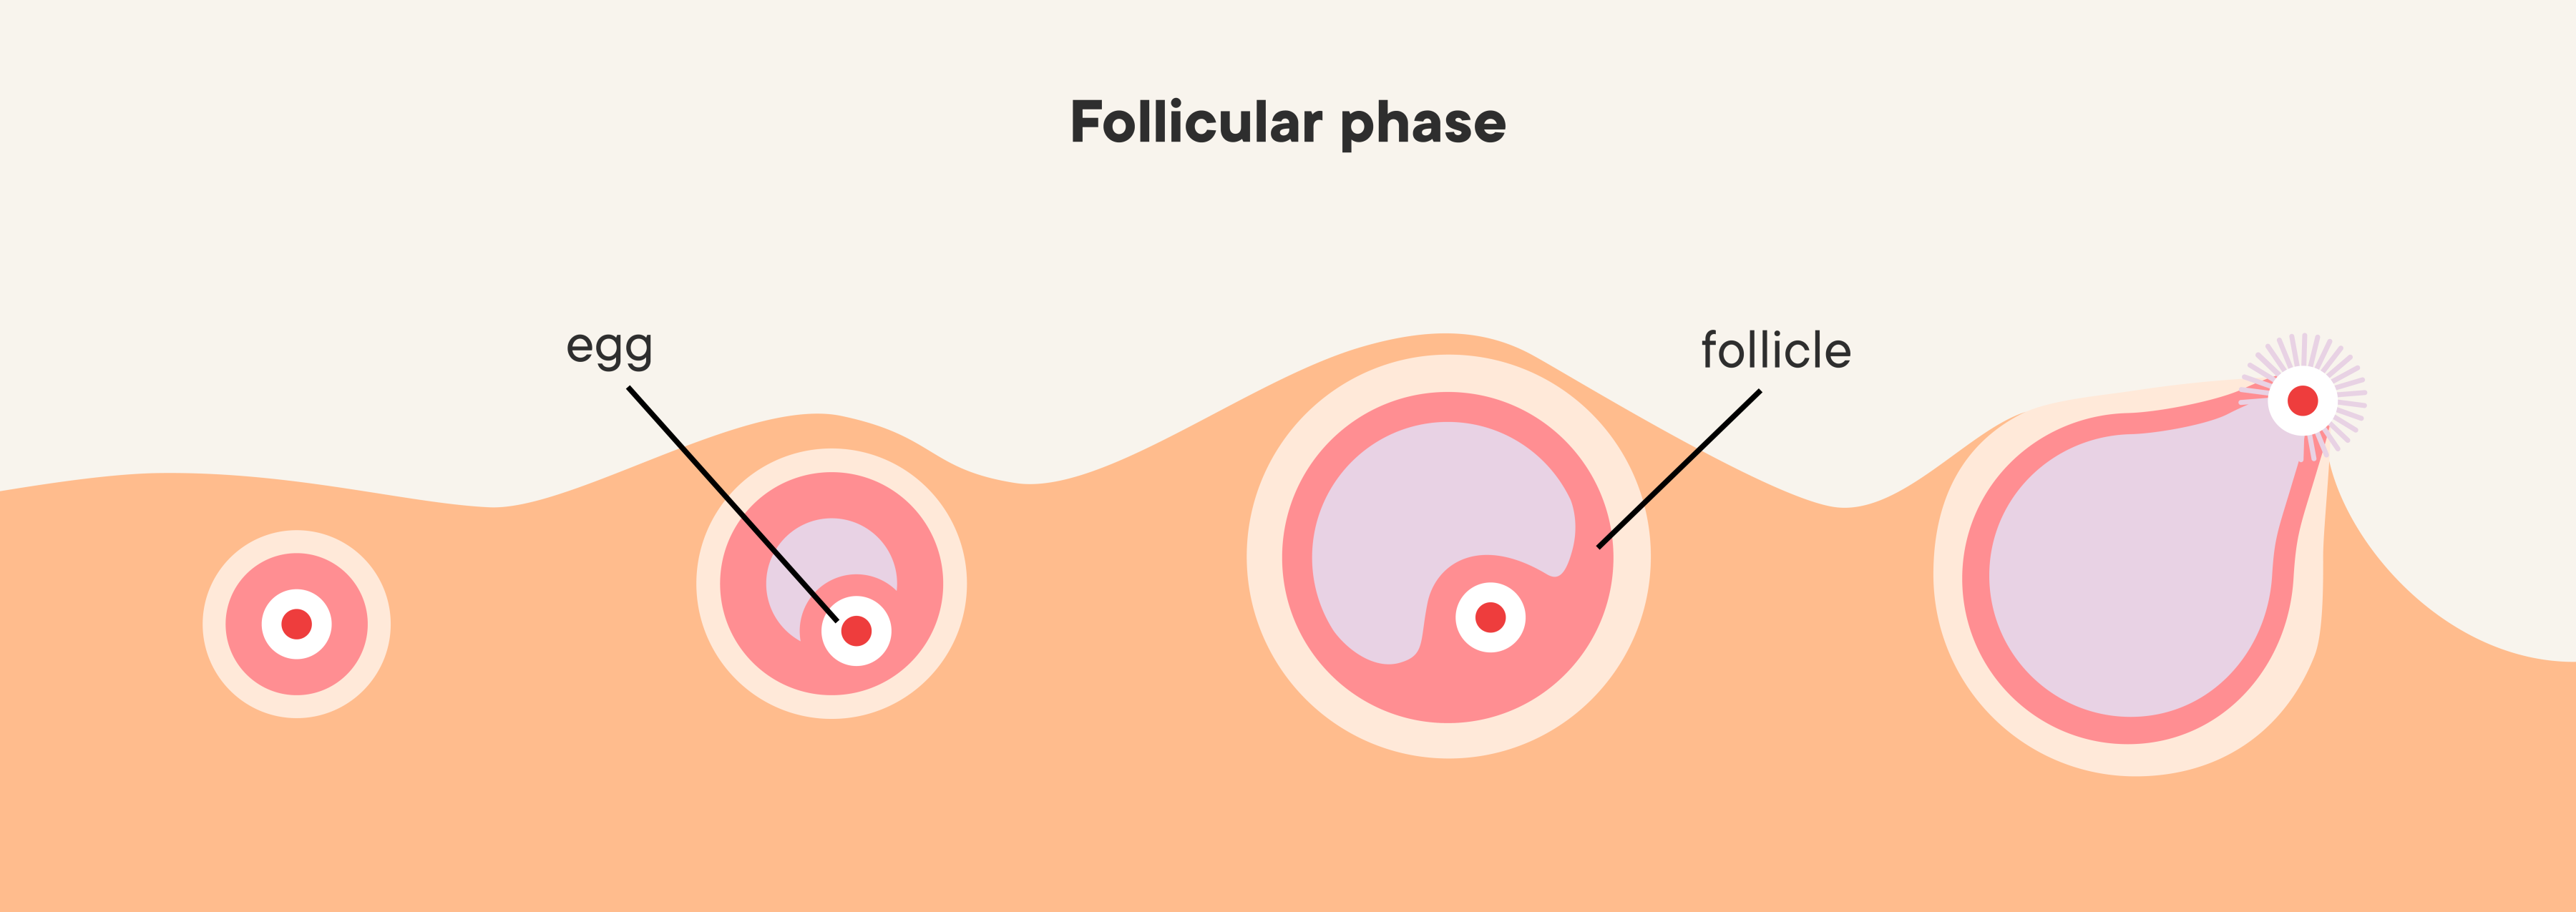 Illustration of the progression of the follicular phase in the ovaries.